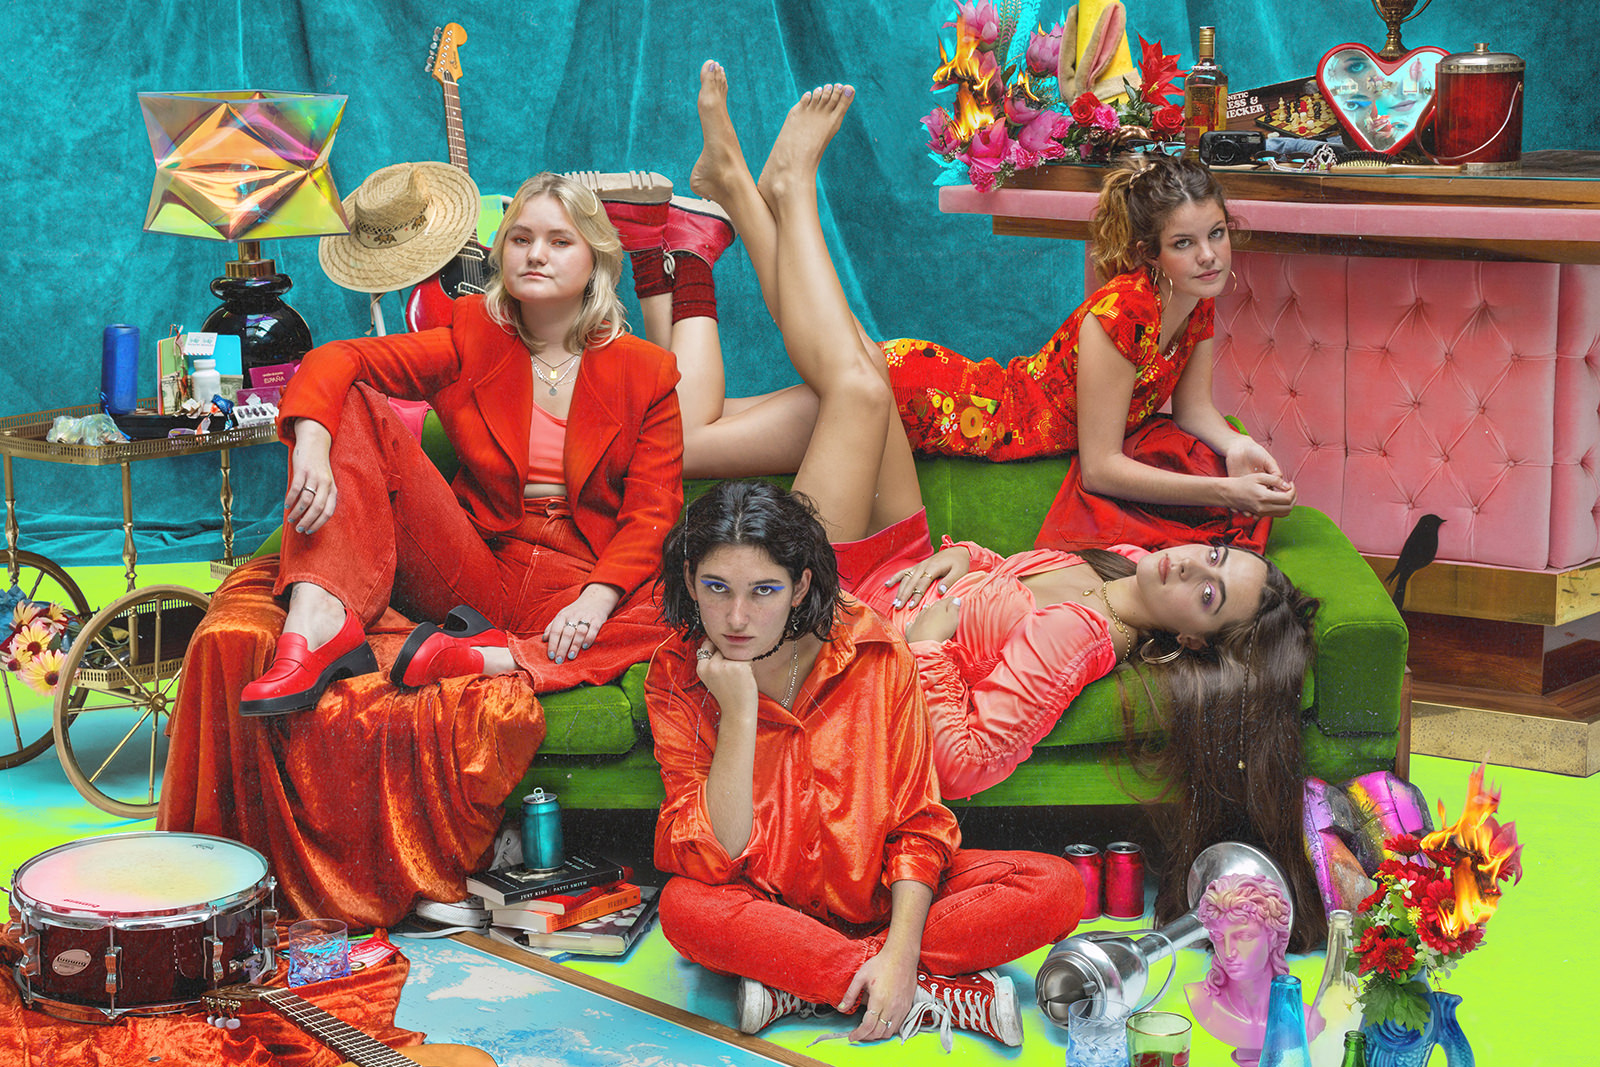 Hinds Album Review - The Prettiest Curse - Sound and Fiction